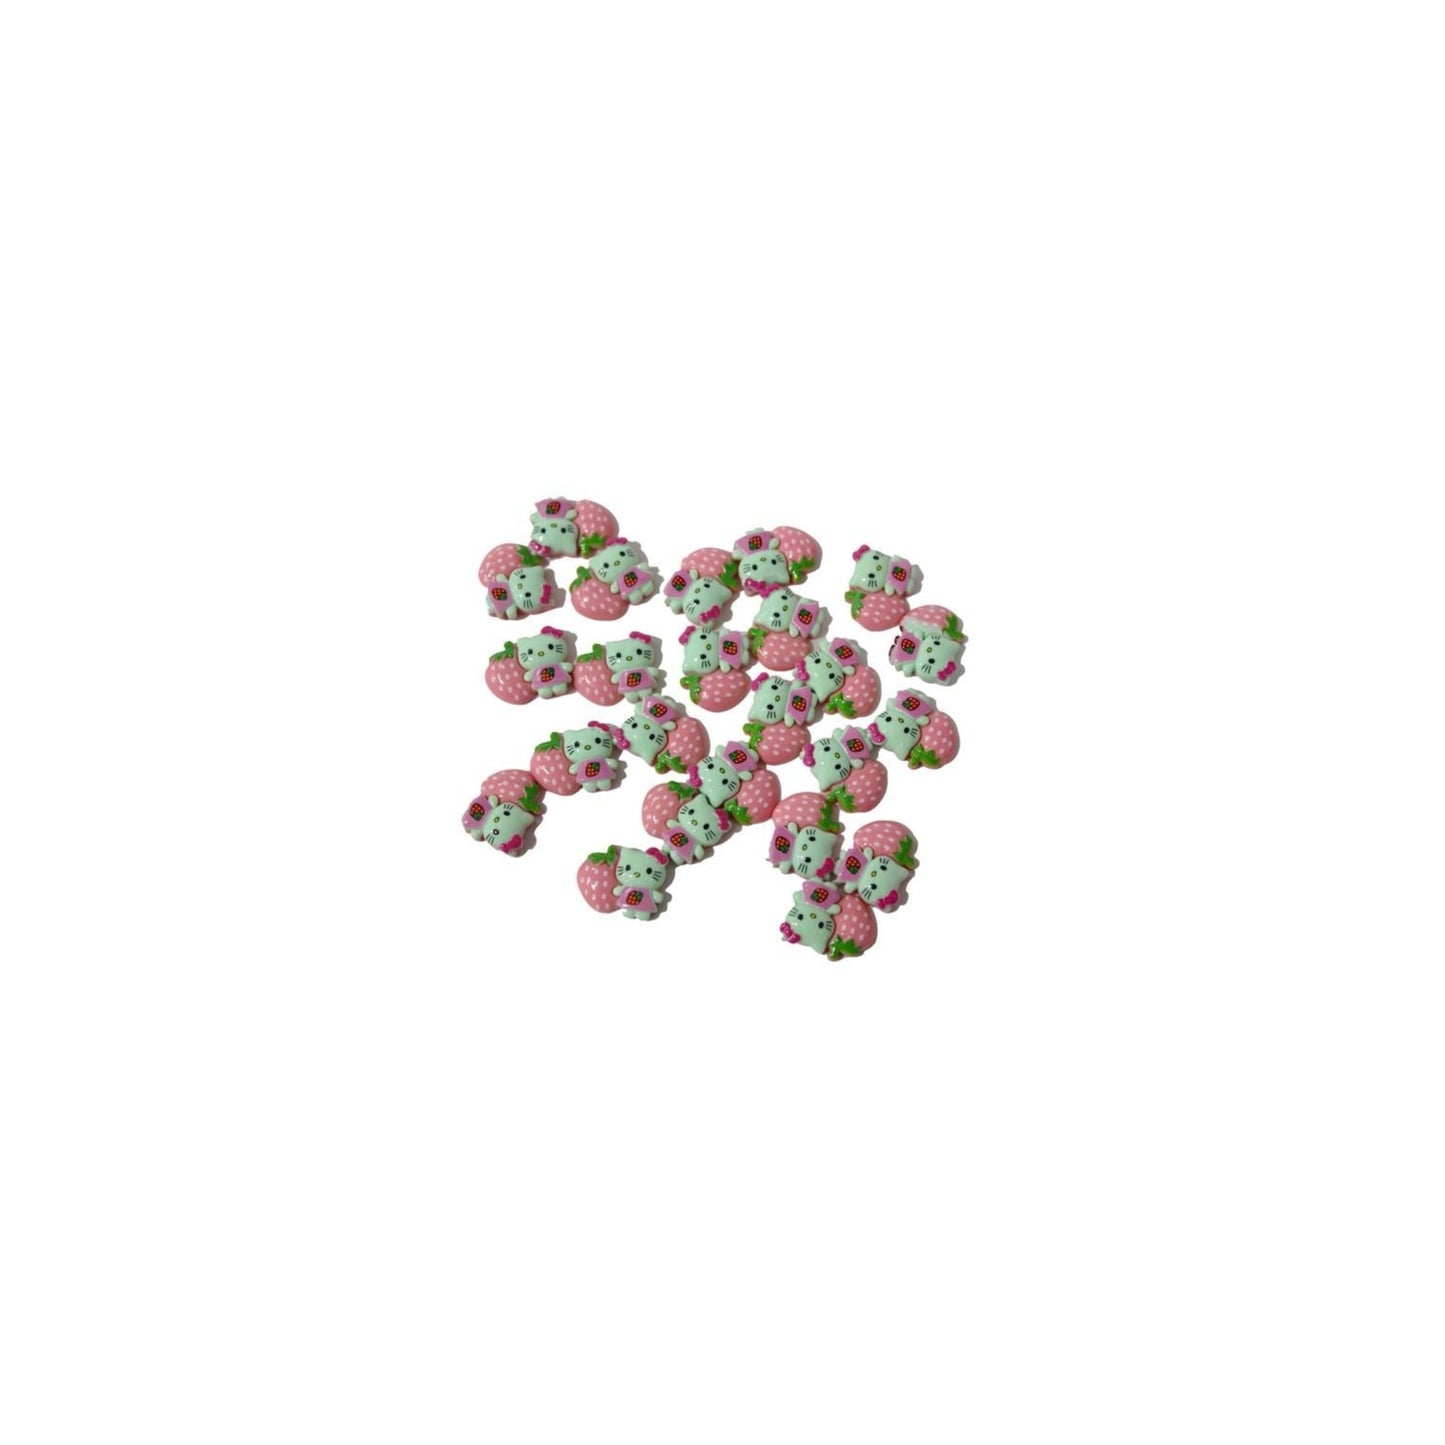 Indian Petals Resin Acrylic Cute Kitty with Cherry Motif for Jewelry Craft or Decoration - 11595, Sea Green